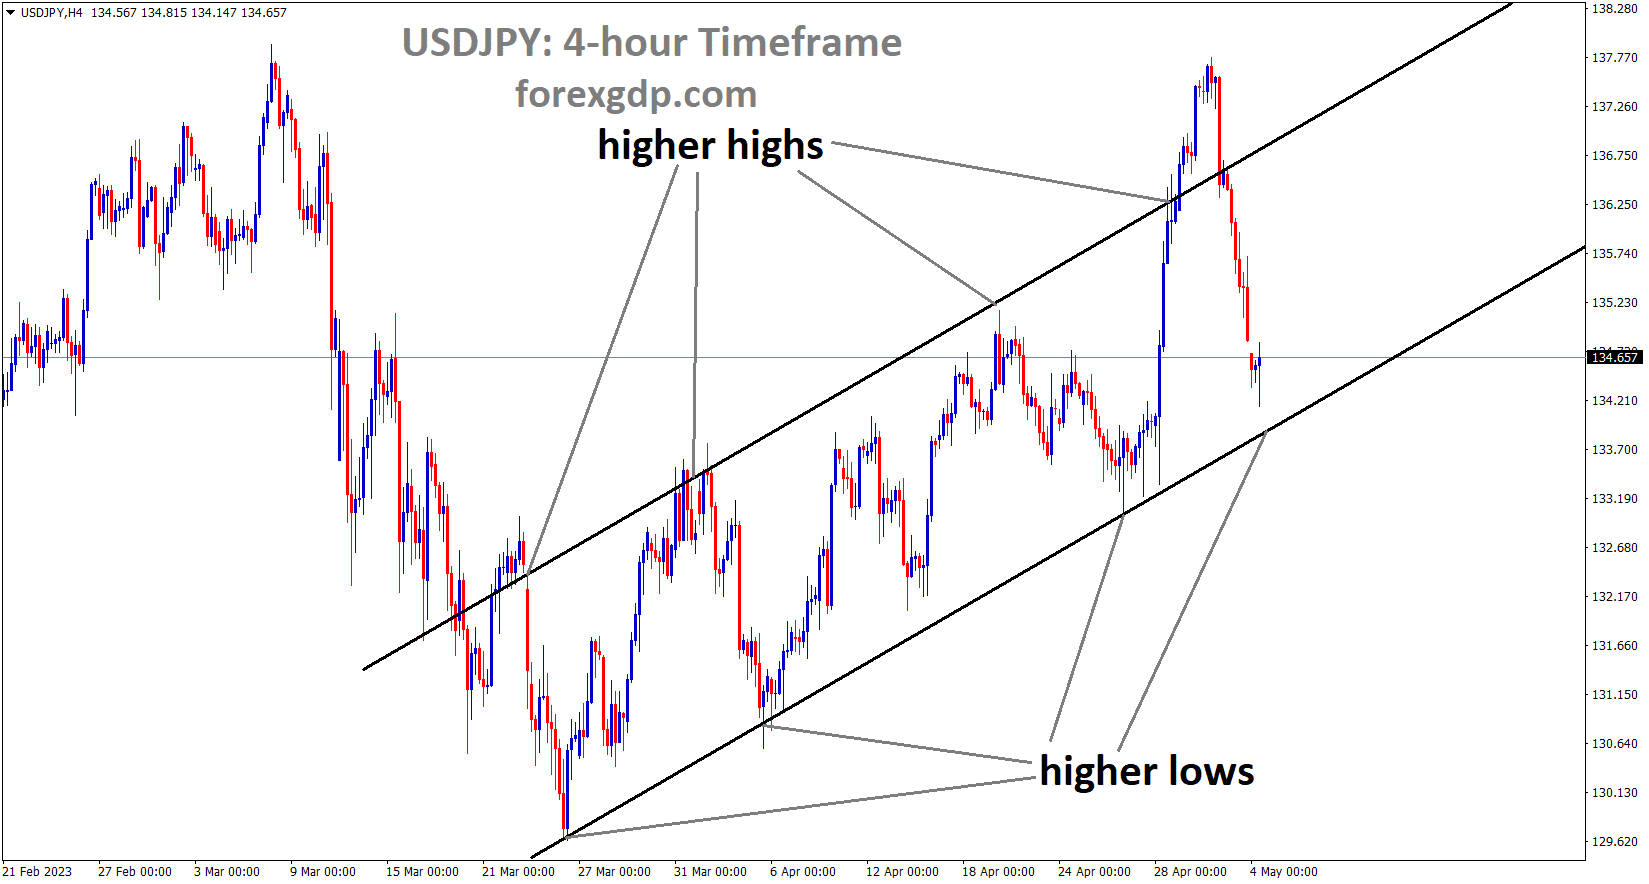 USDJPY is moving in an Ascending channel and the market has reached the higher low area of the channel 1